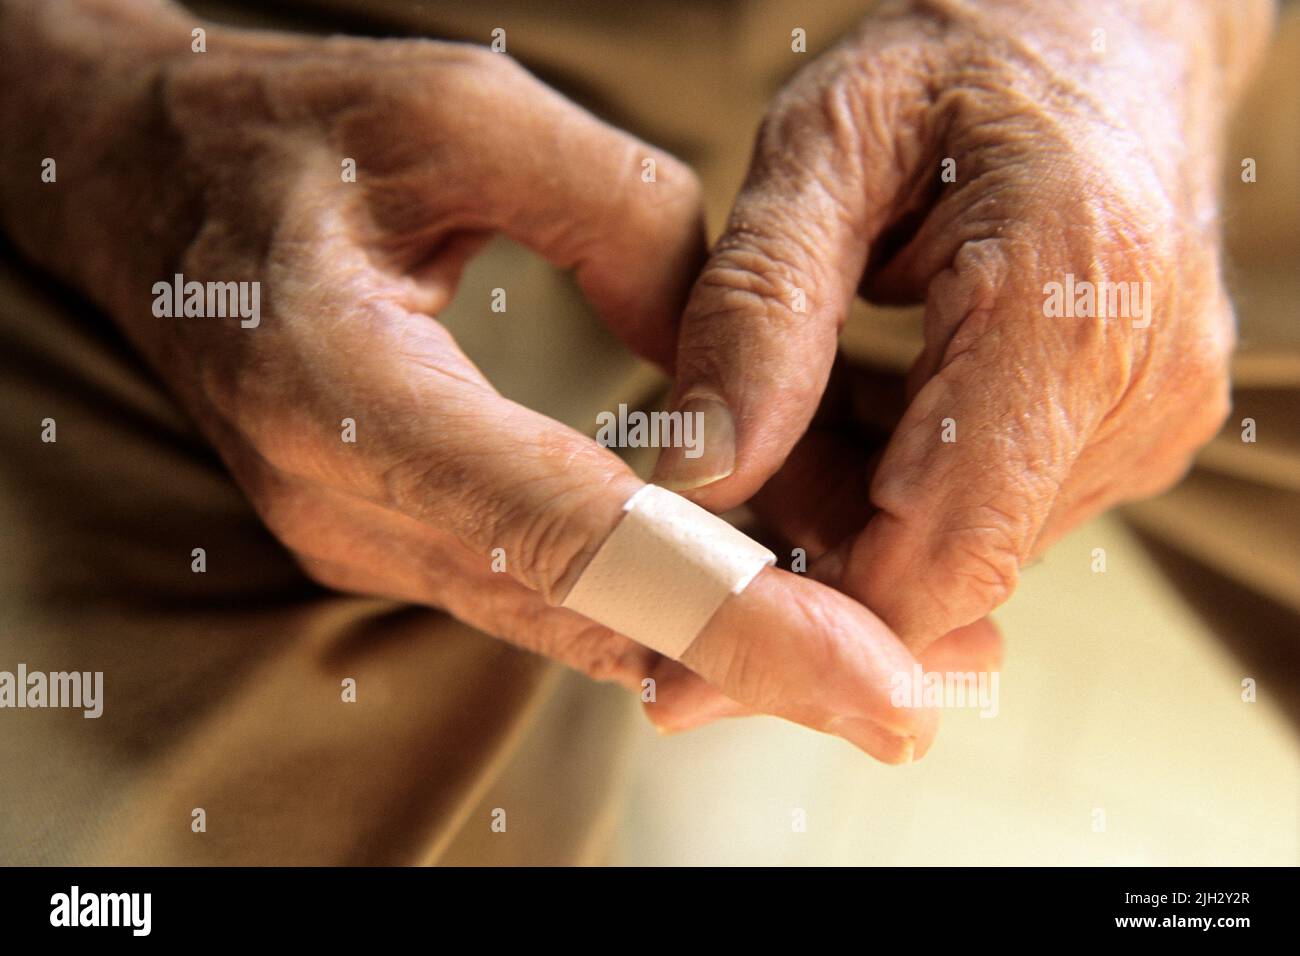 Man putting a band-aid on his finger. Dressing an injury at home Stock Photo